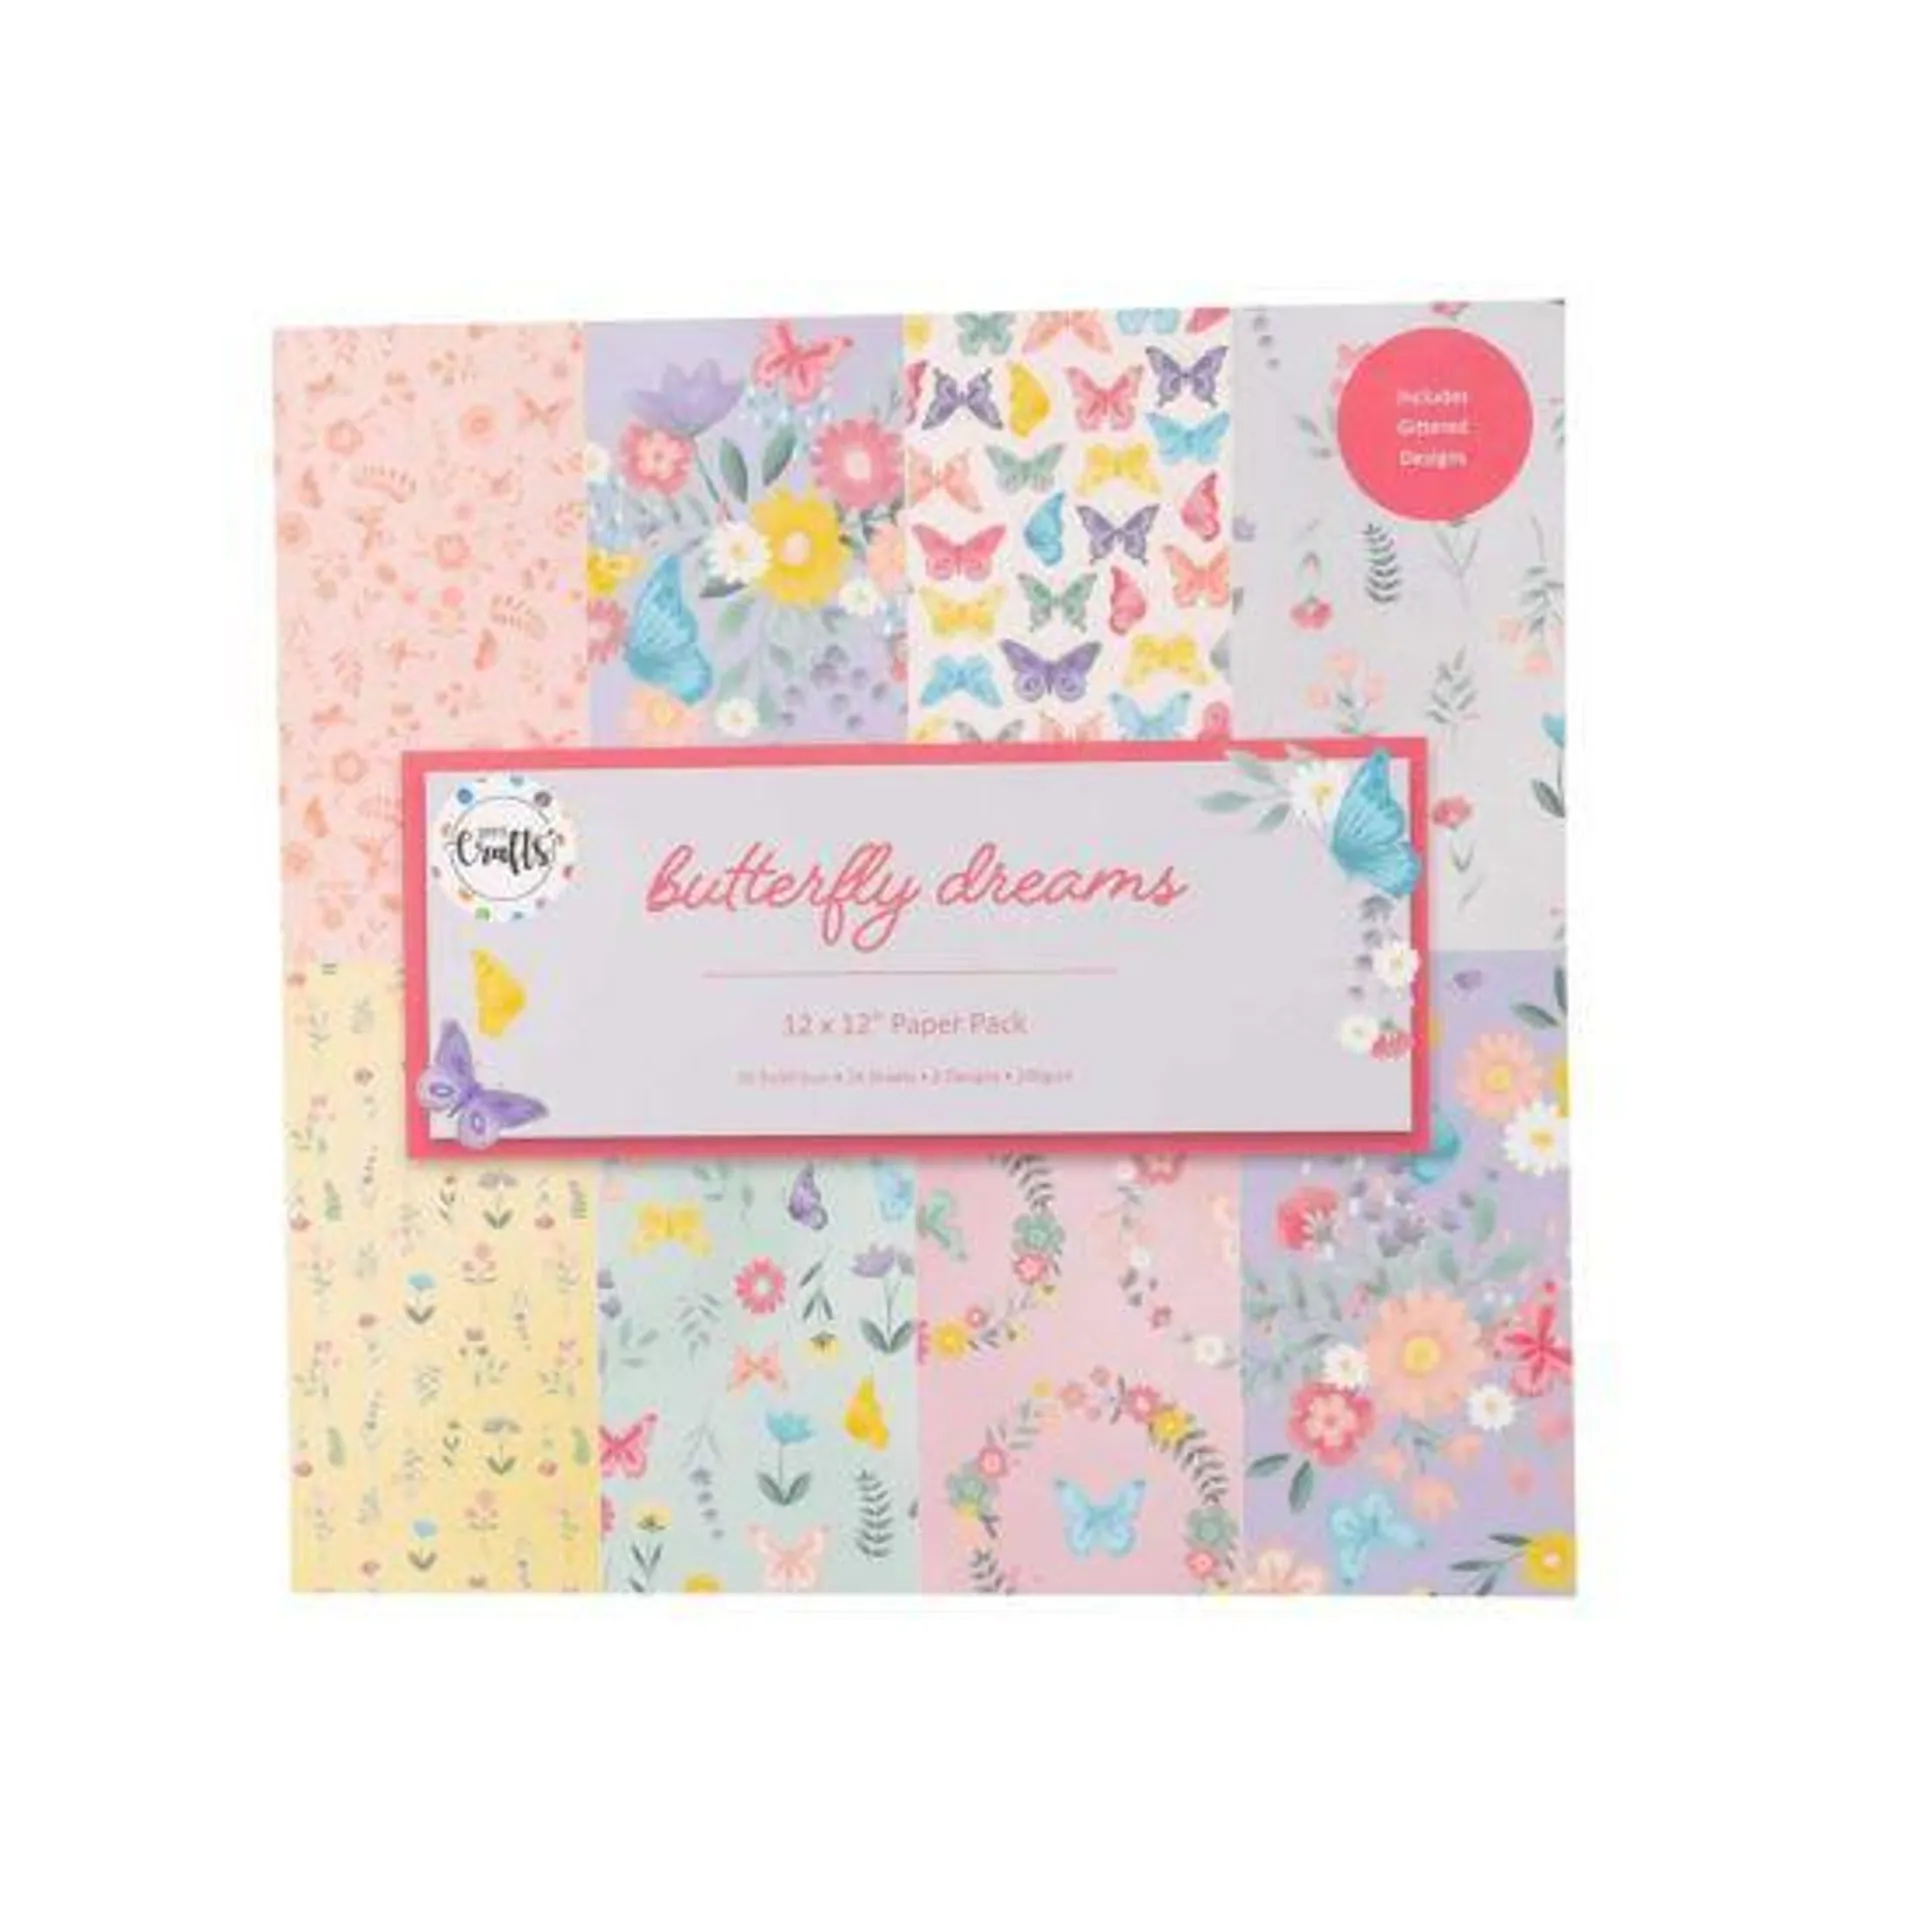 1893 Crafts Craft Paper Pack of 24 Sheets 12 x 12 Inches - Butterfly Dreams